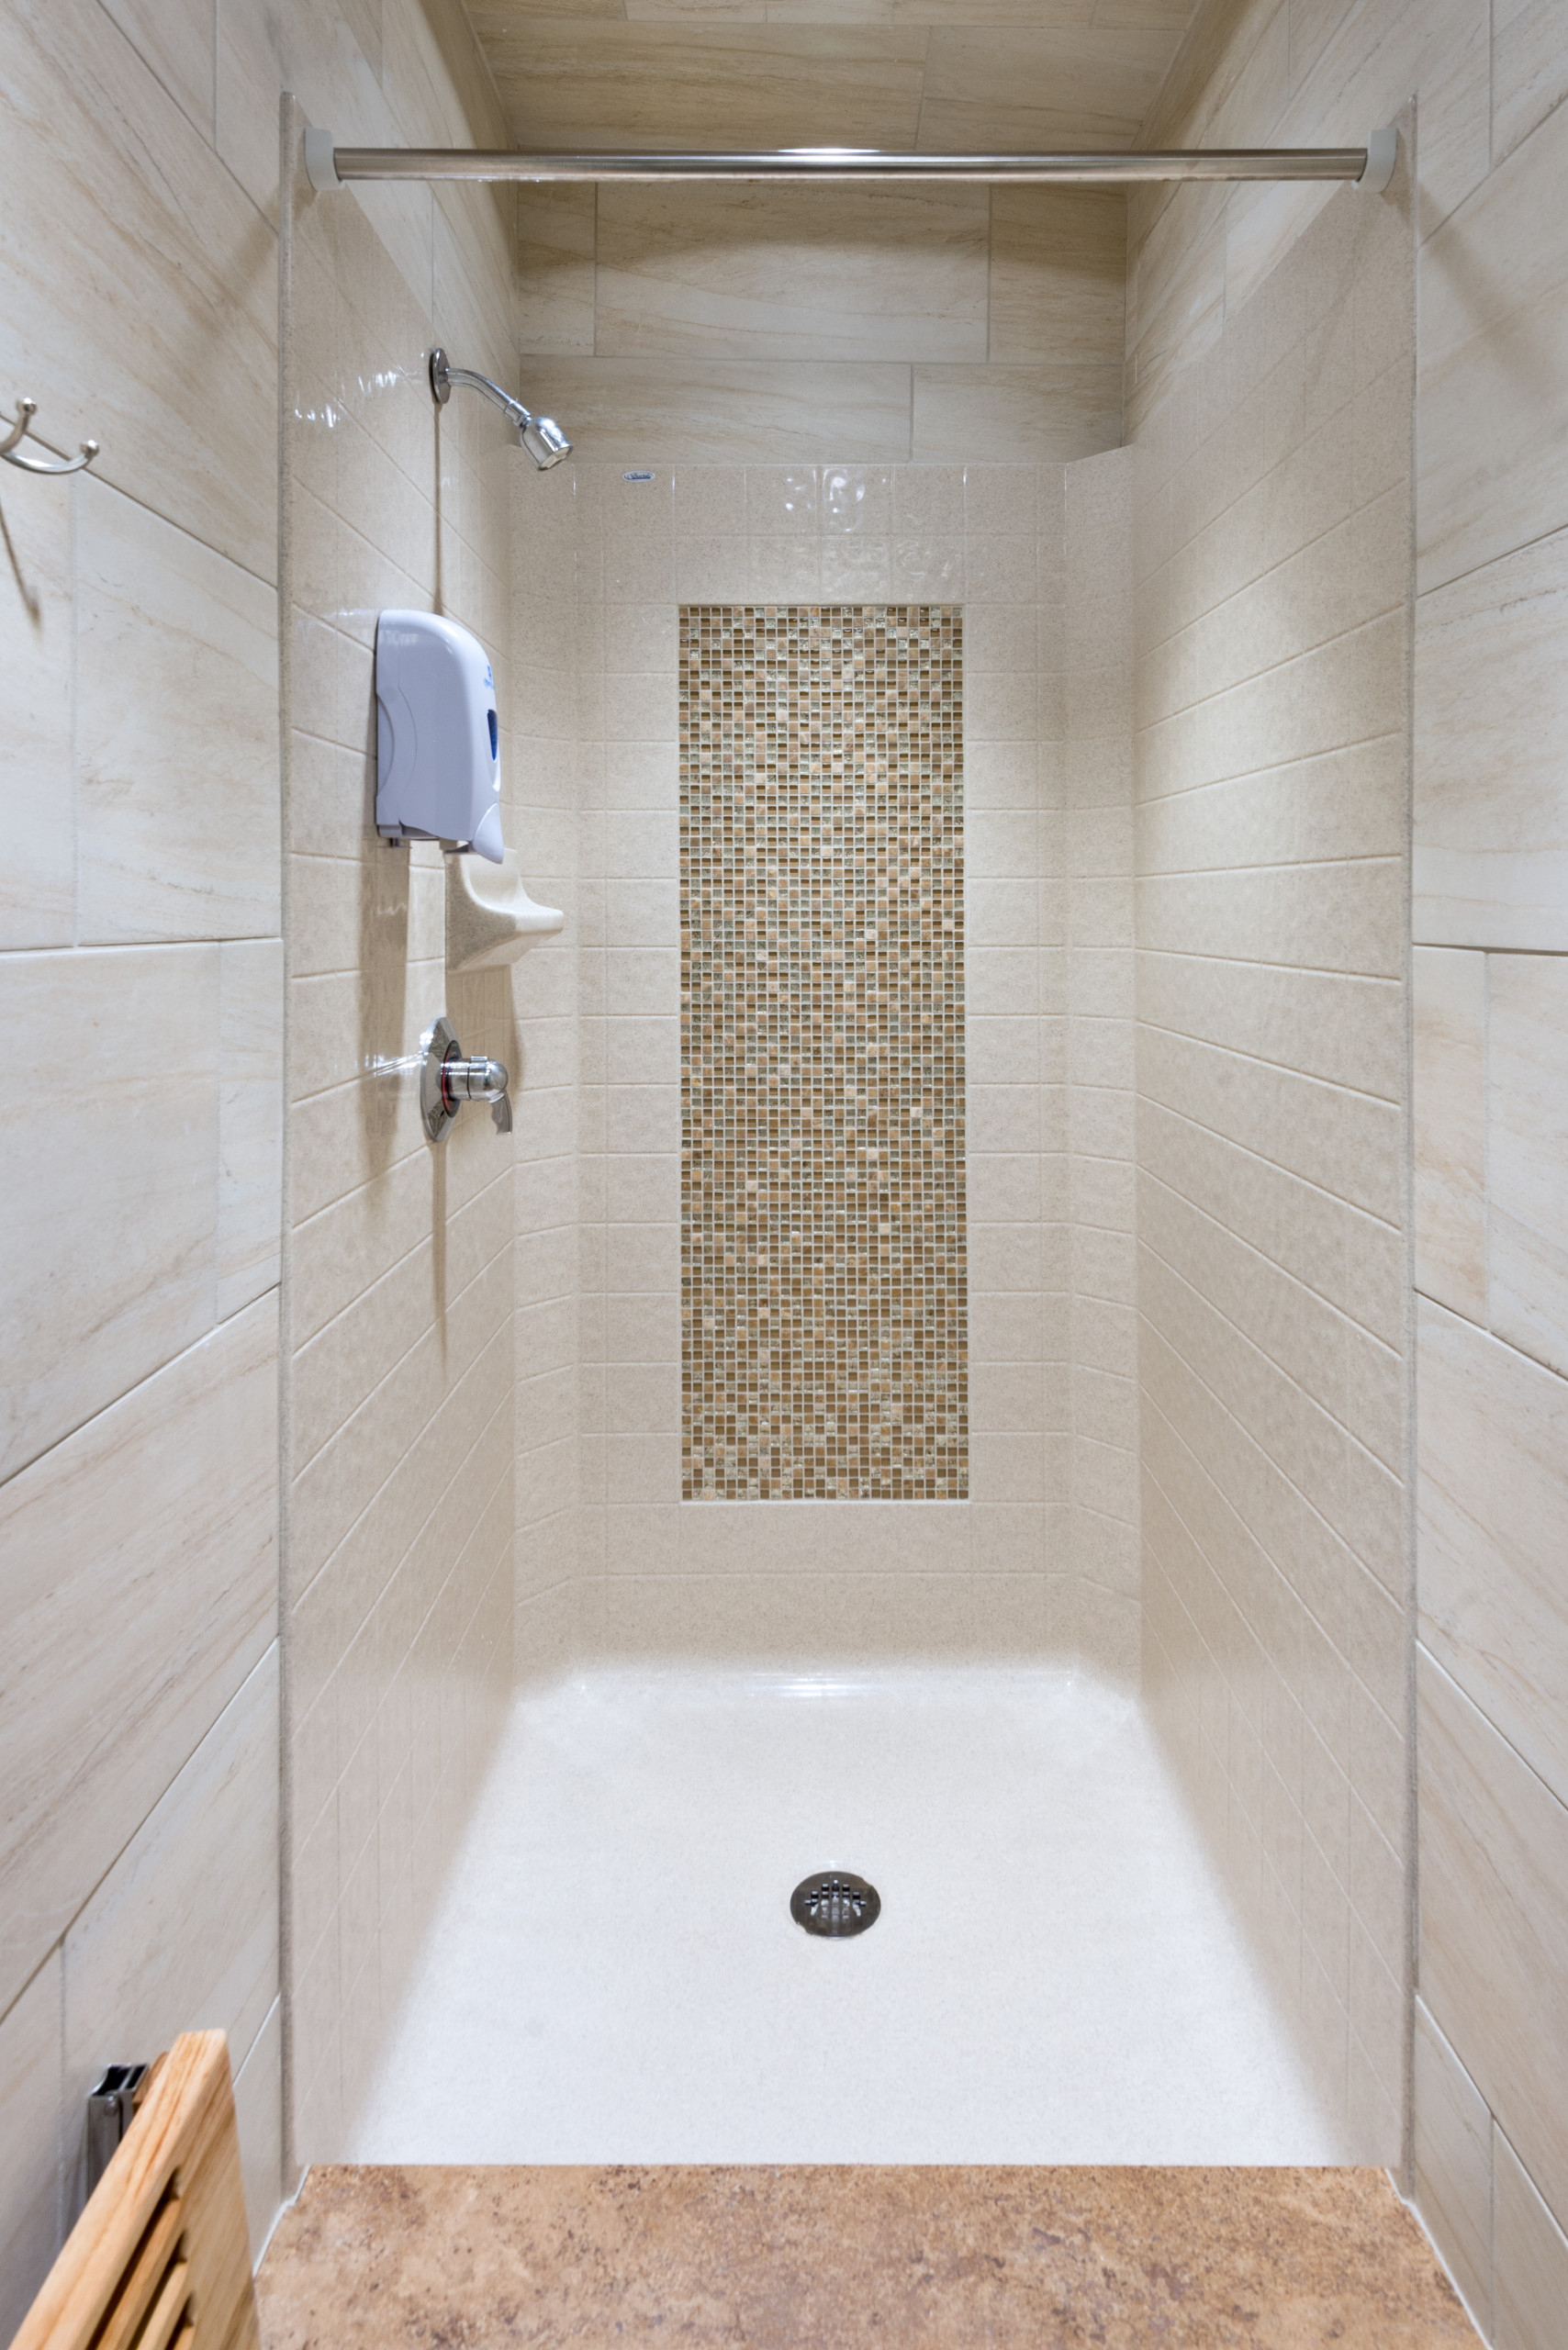 Corner Soap Dish Bathroom Ideas Houzz, How To Replace A Soap Dish In Tile Shower